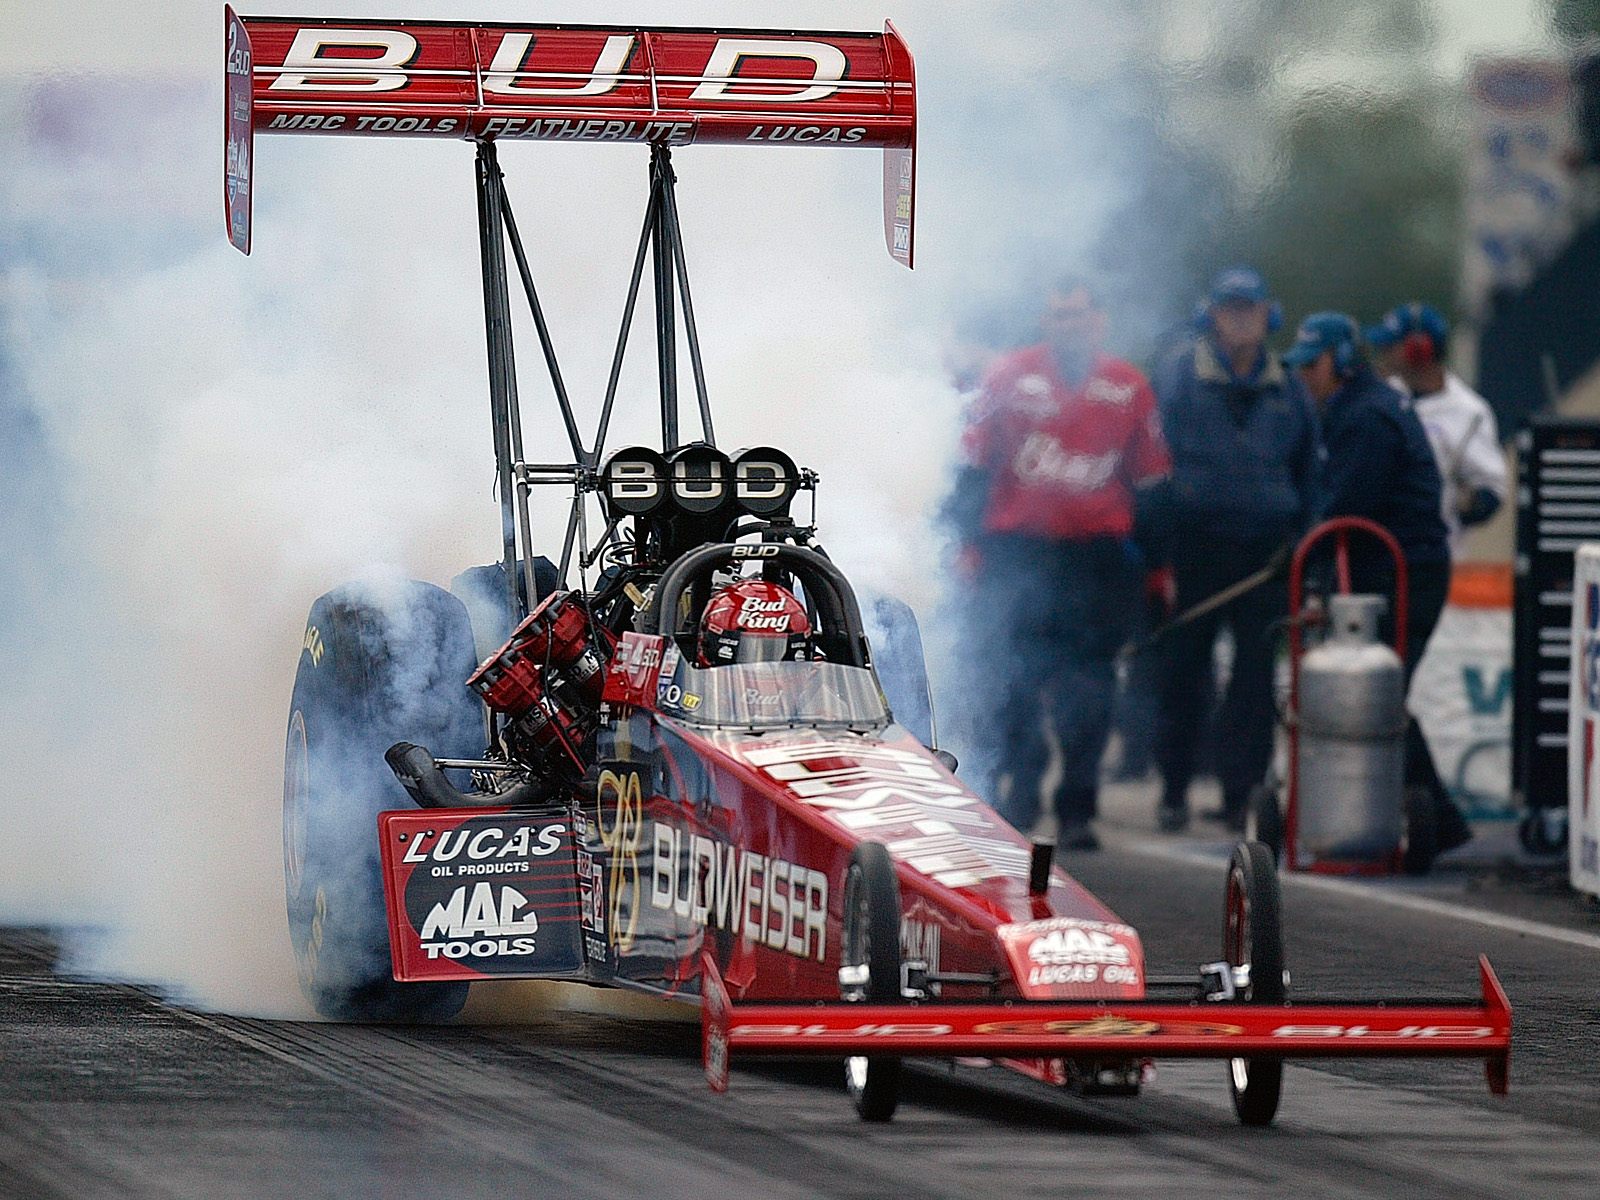 Unknown Top Fuel Dragster